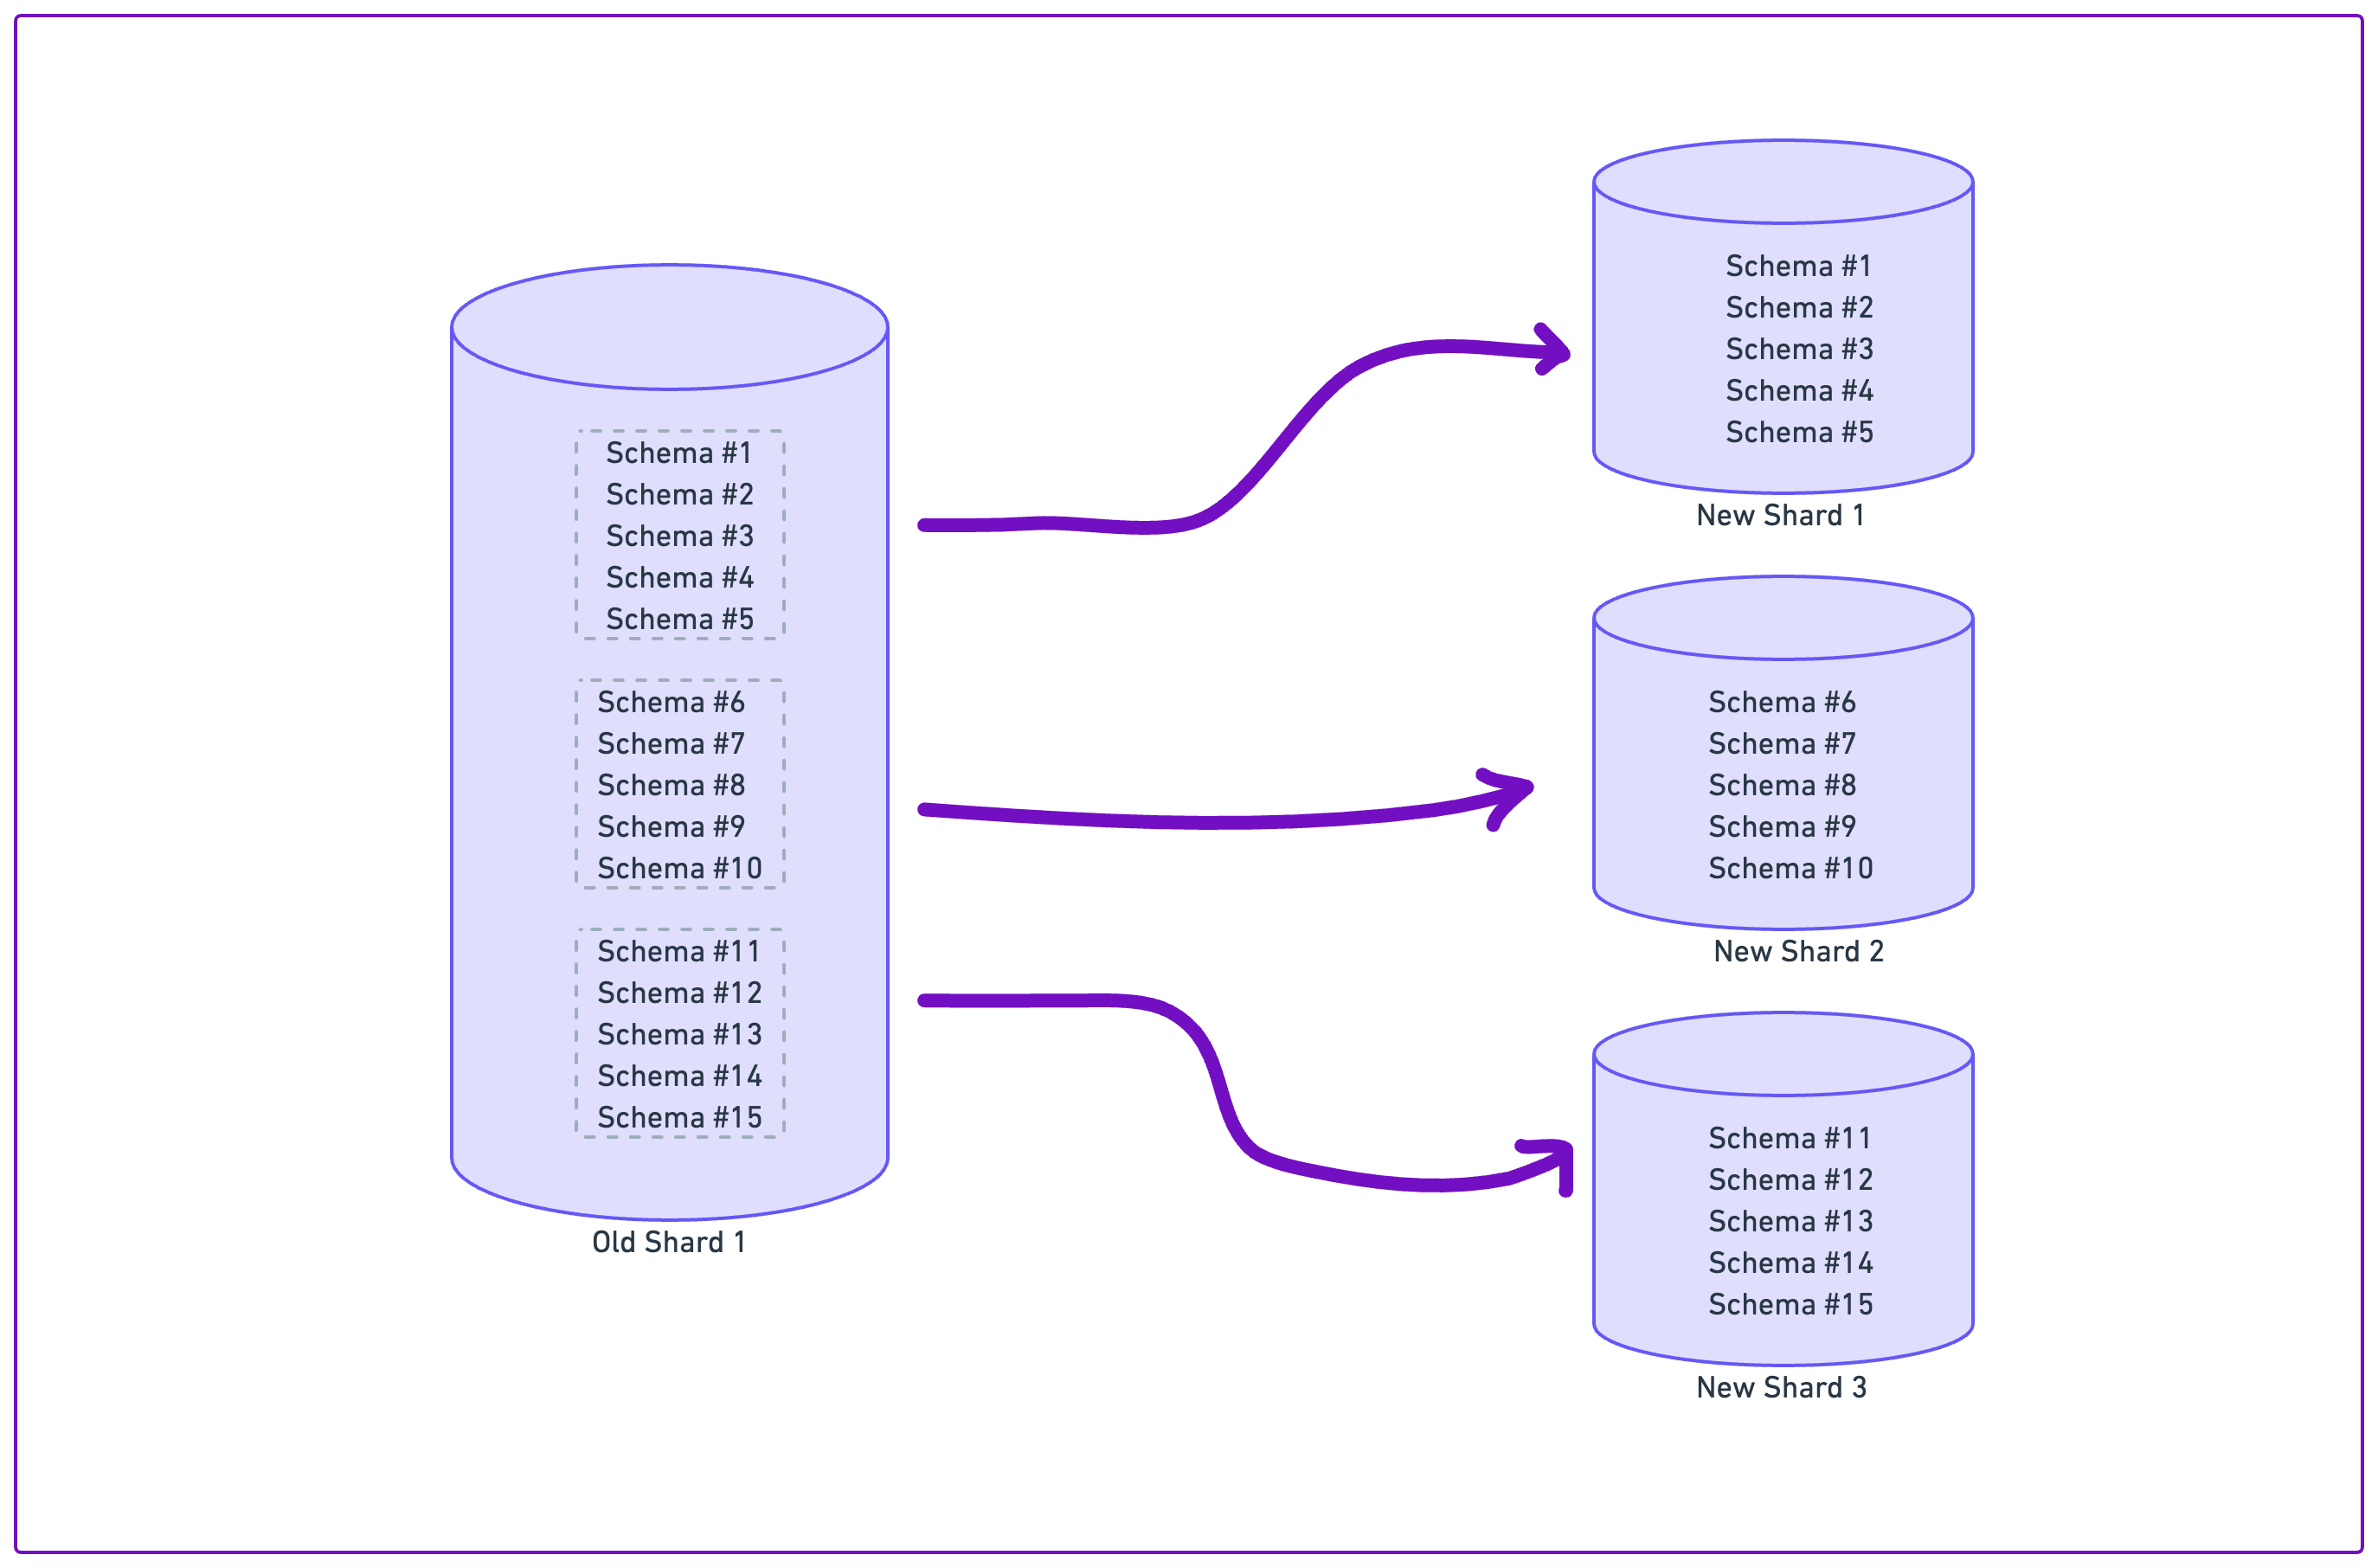 Example division of logical schema sets for one of the existing databases with schemas 1 – 15